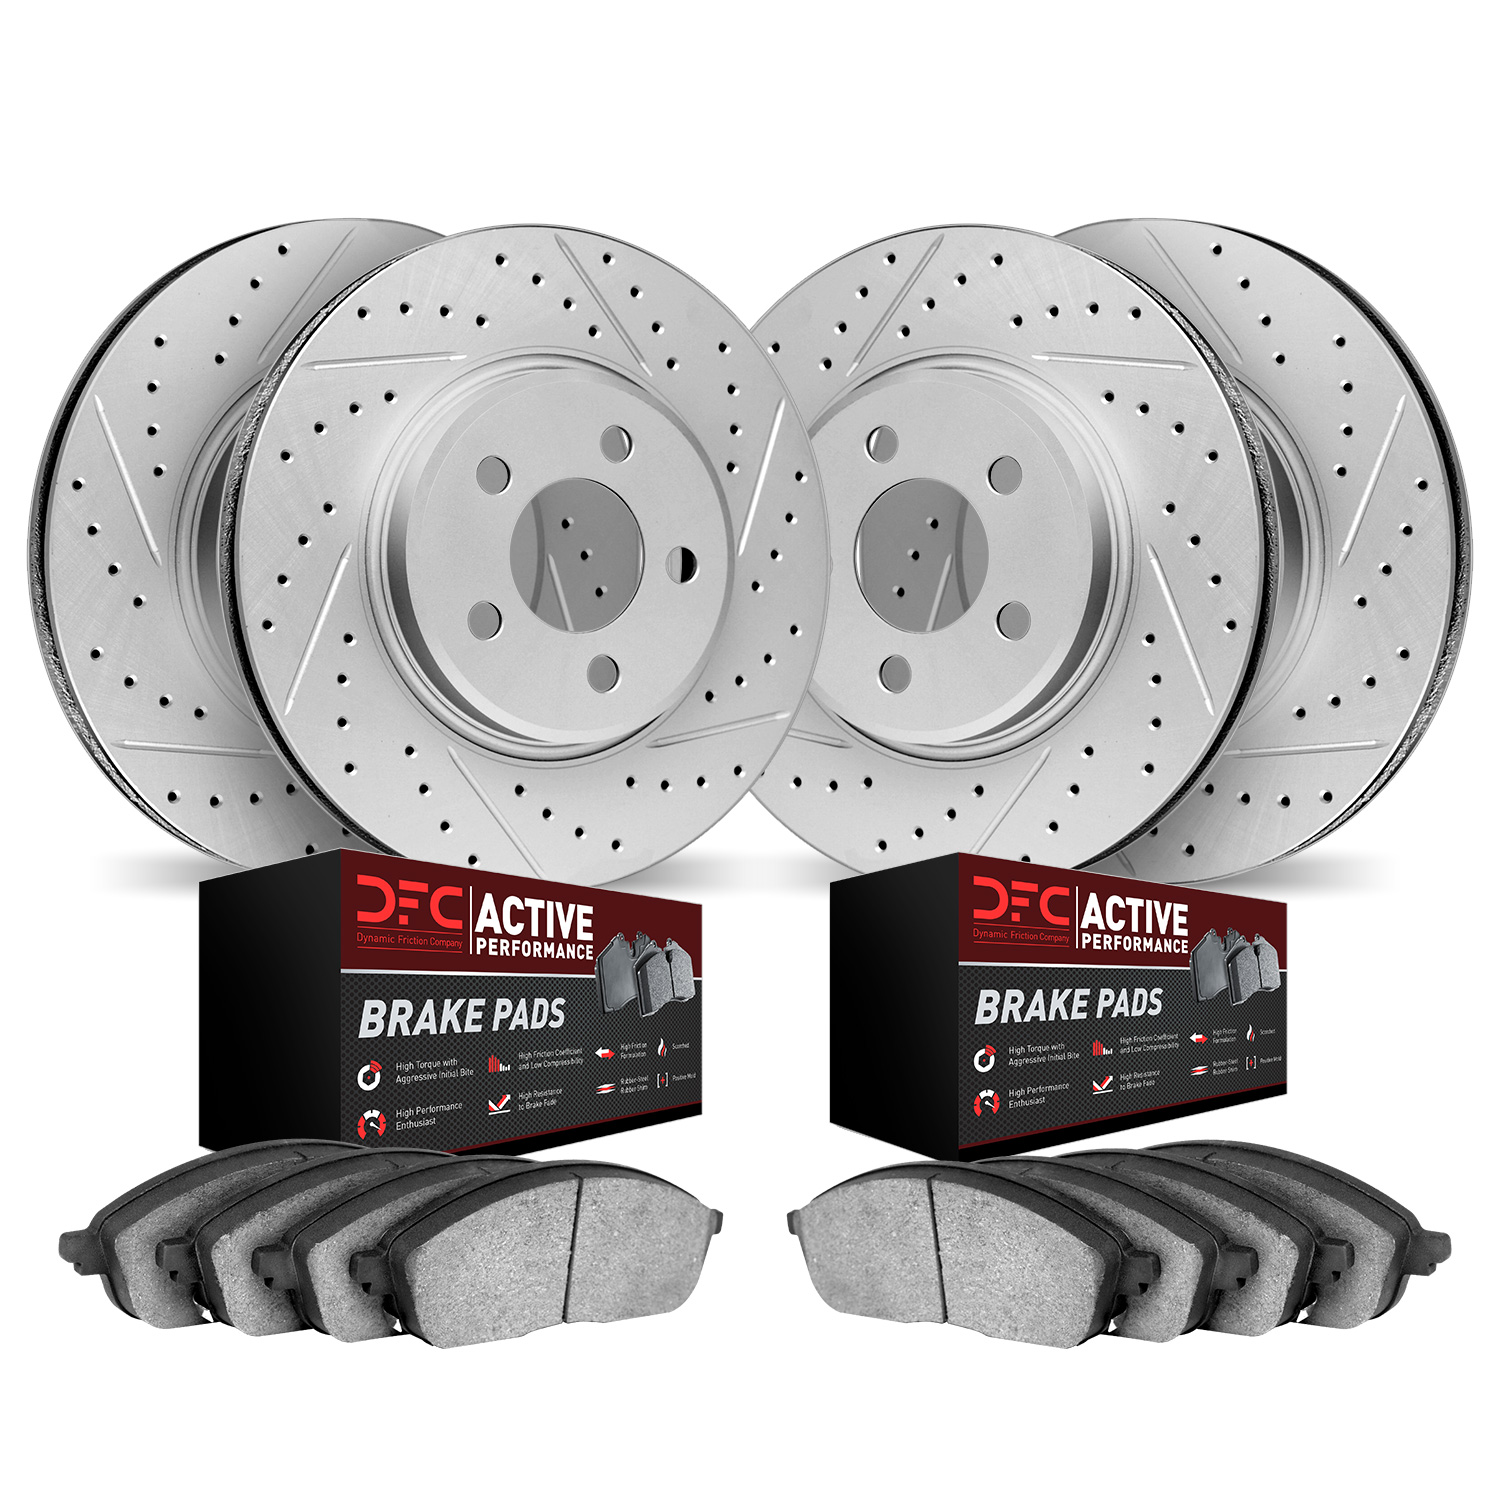 2704-31063 Geoperformance Drilled/Slotted Brake Rotors with Active Performance Pads Kit, 2004-2010 BMW, Position: Front and Rear